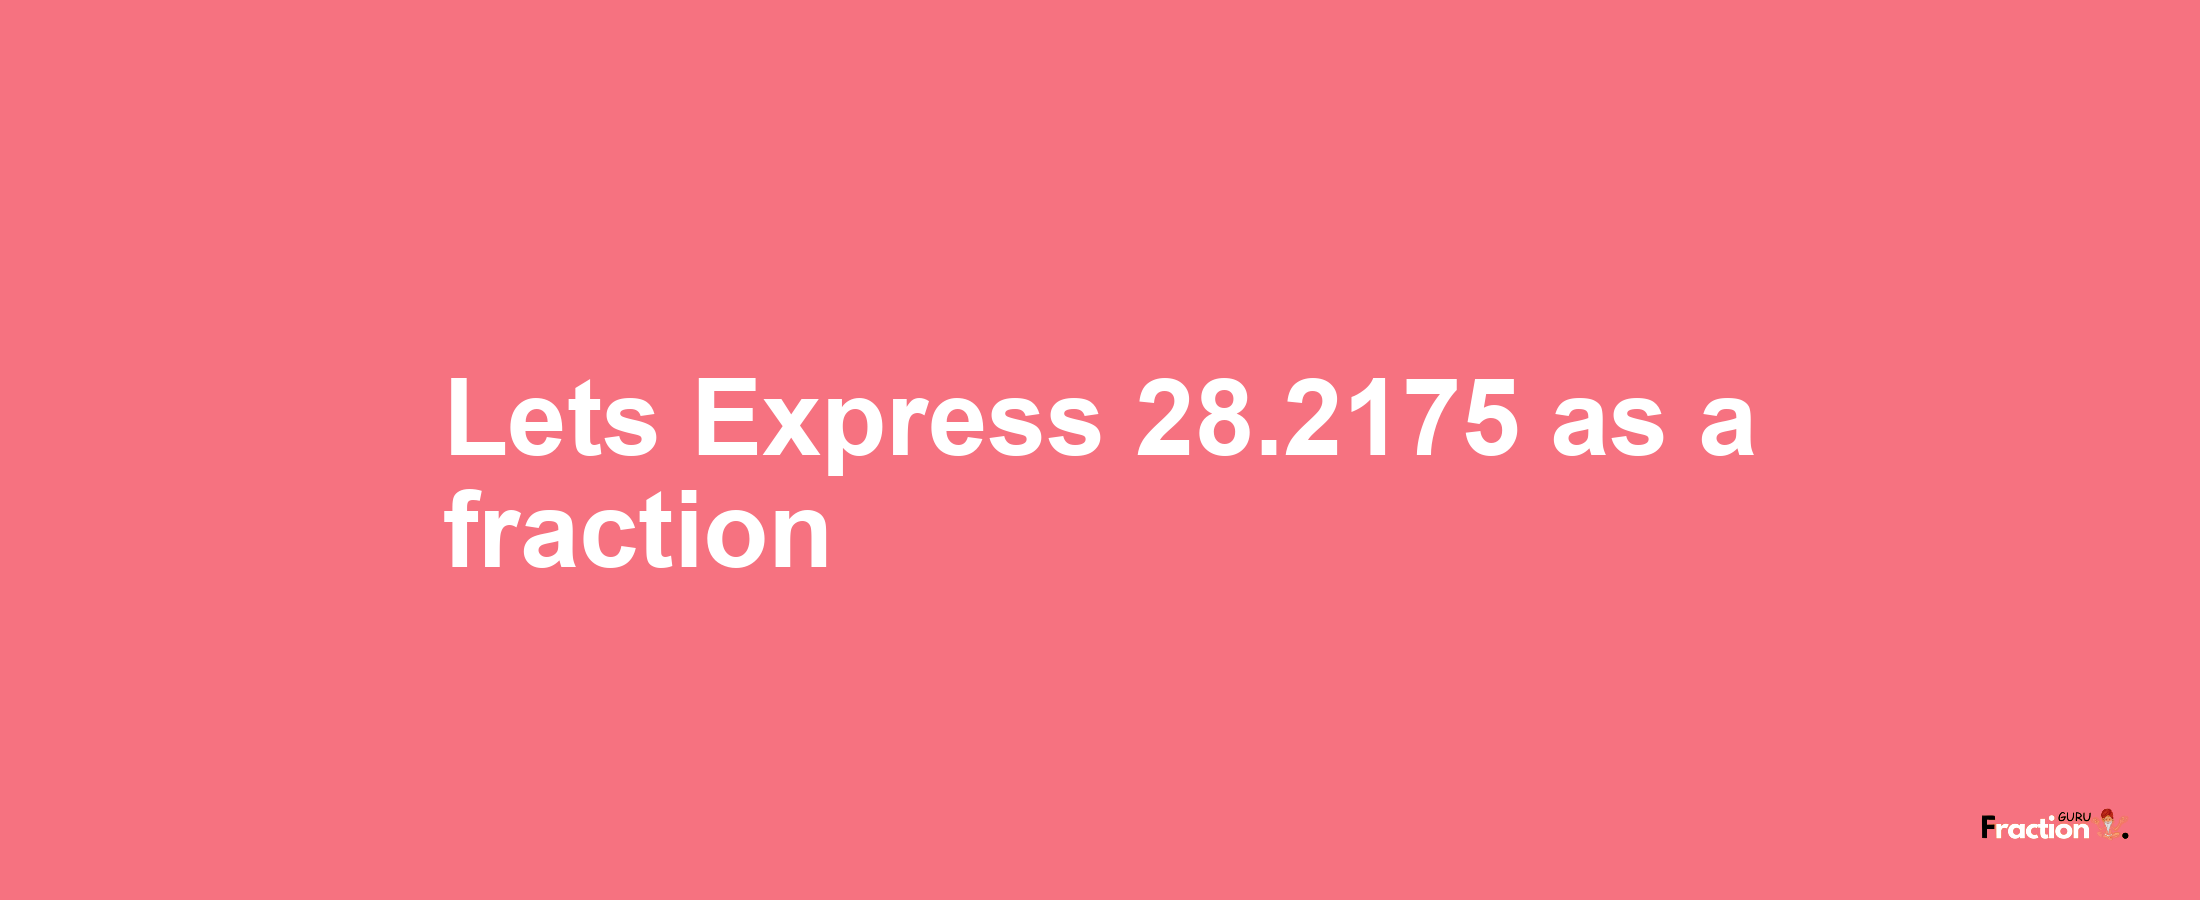 Lets Express 28.2175 as afraction